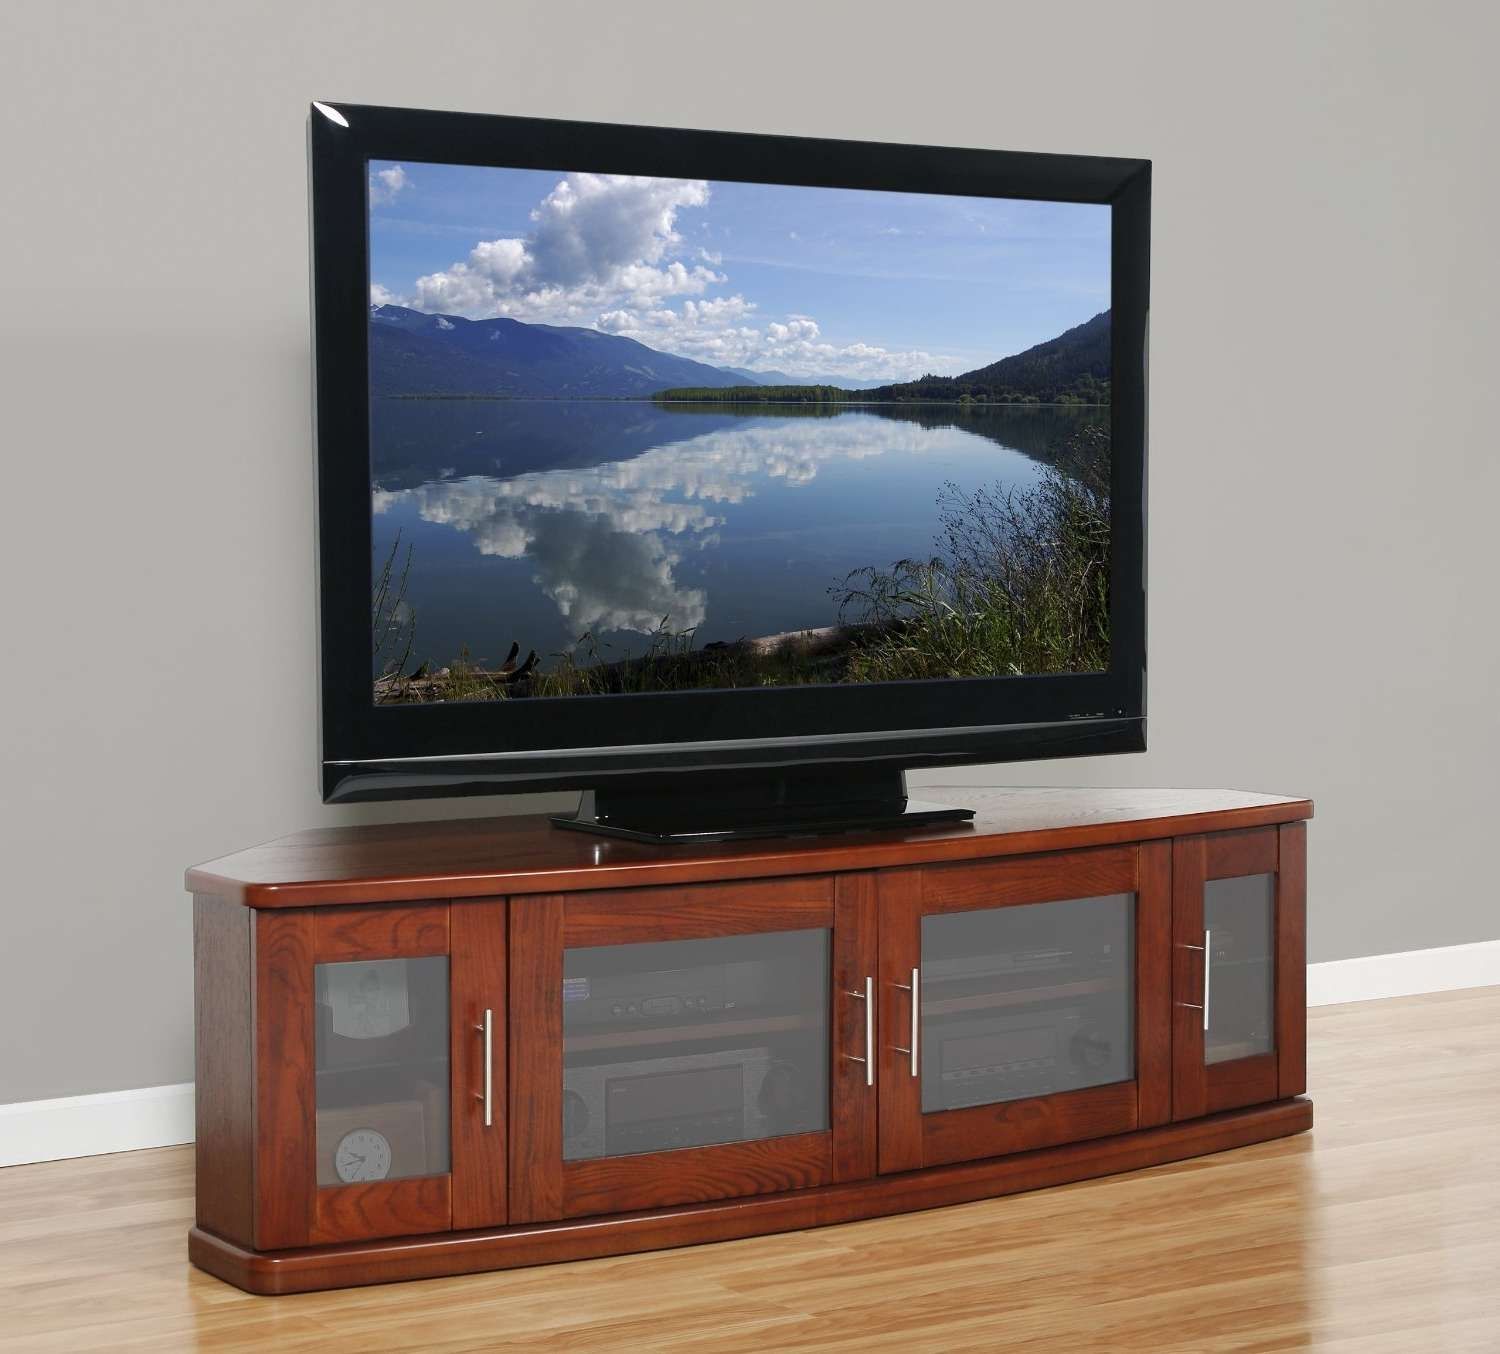 Curved Brown Figured Cherry Wood Low Cabinet For Tv Stand With 4 Throughout Cherry Wood Tv Cabinets (View 1 of 20)